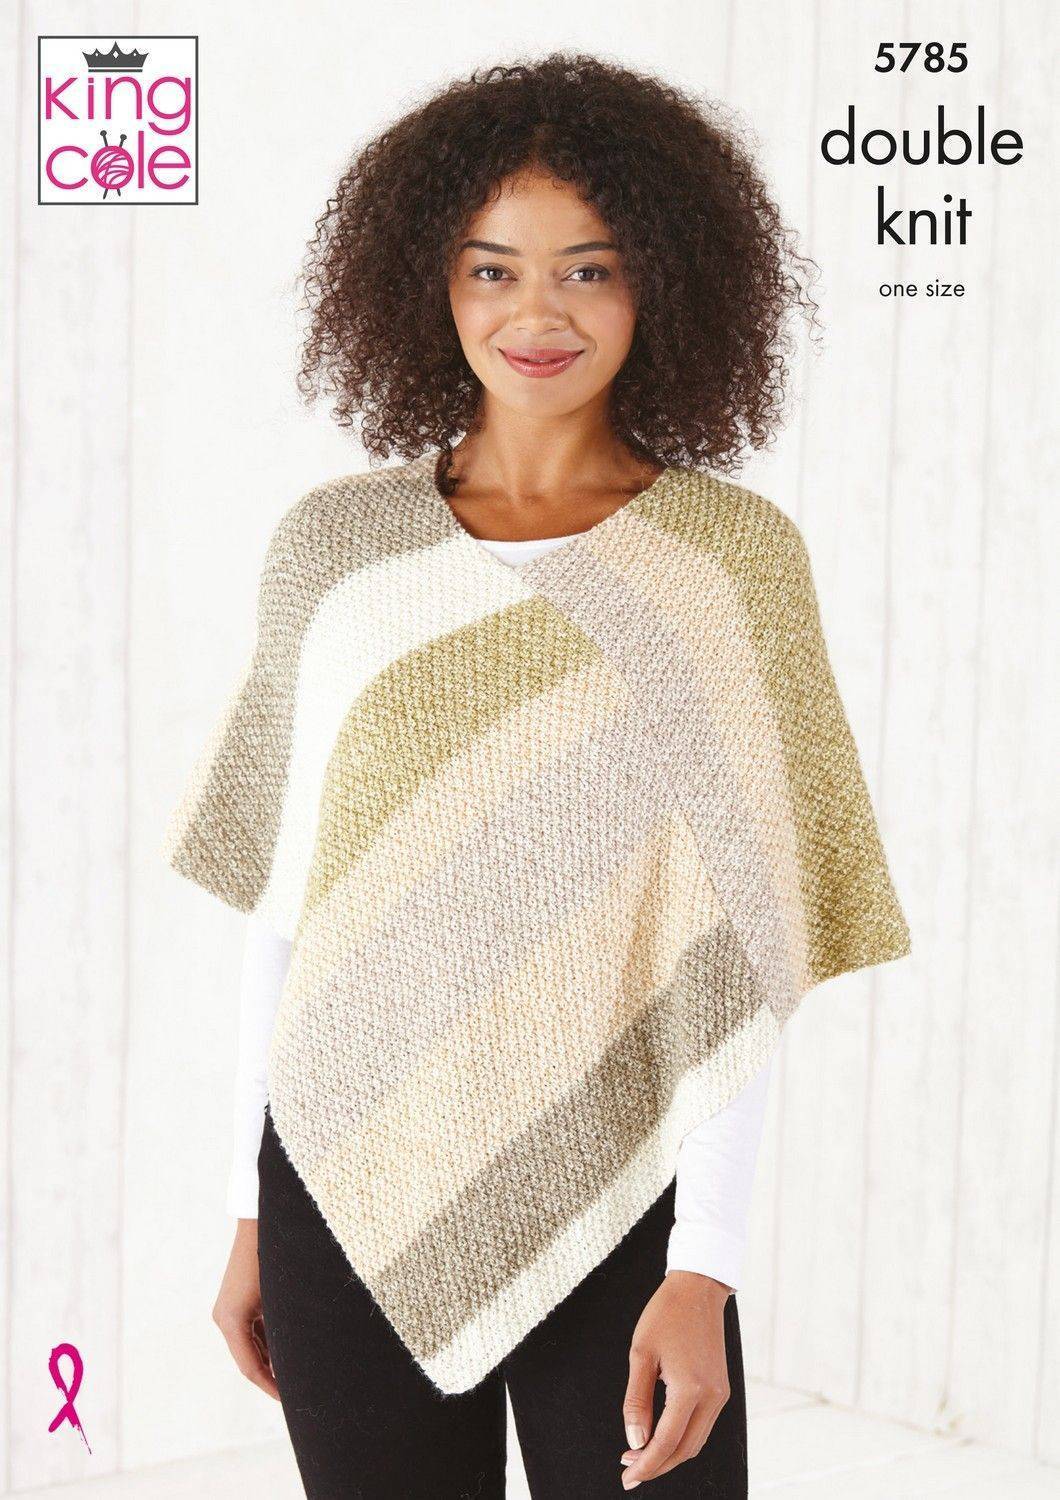 Ponchos in King Cole Harvest DK (5785) | The Knitting Network